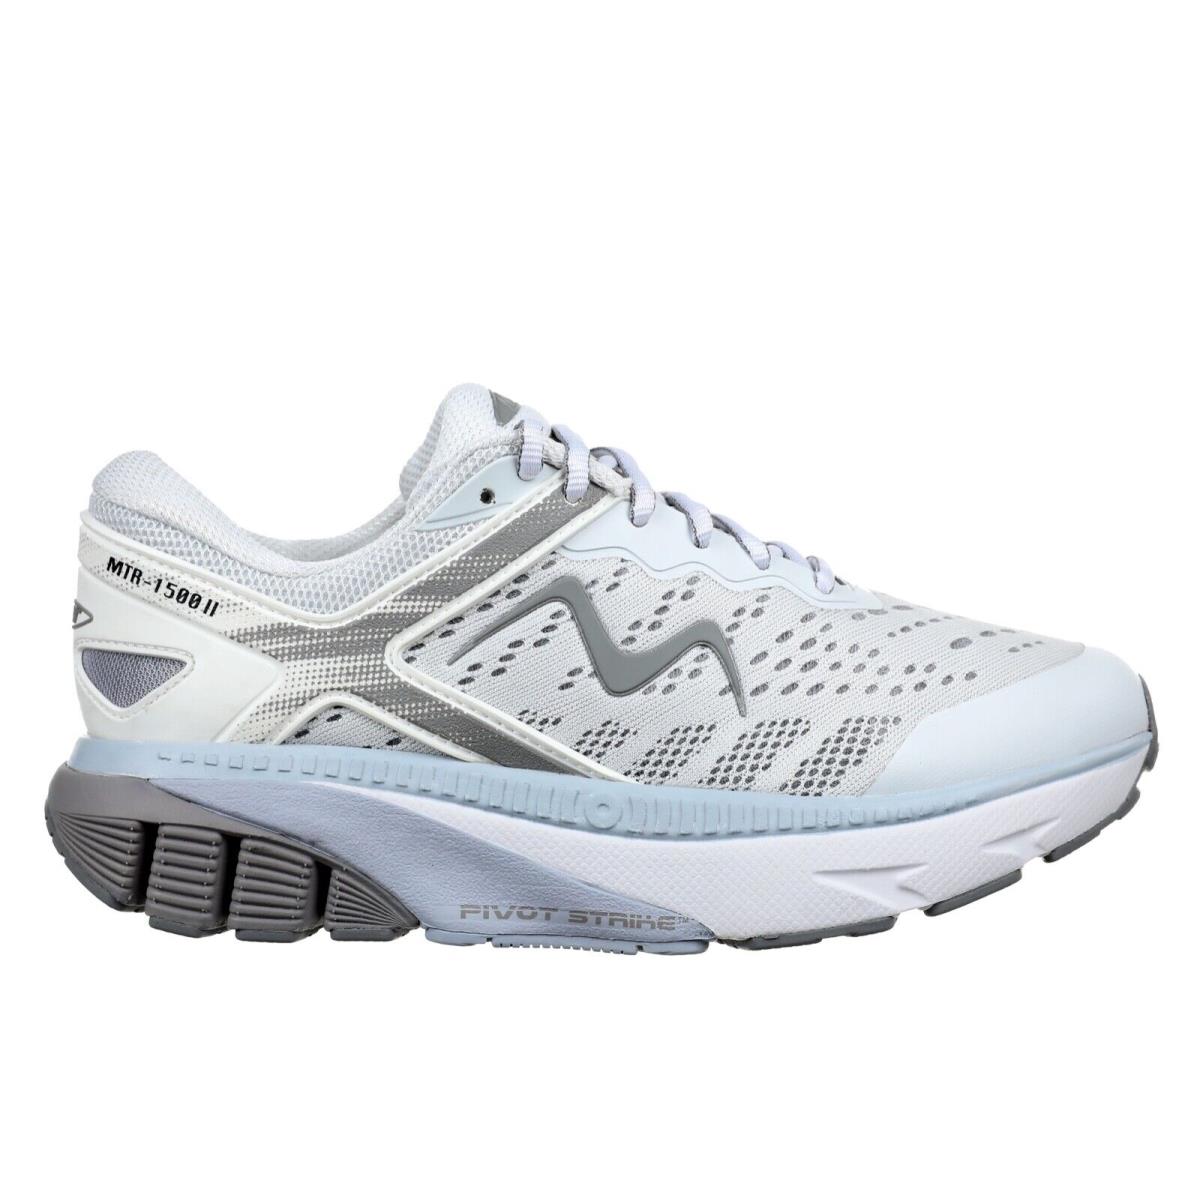 Mbt Mens MTR-1500 Trainer w/ Light Weight Level 2 Rock Mesh 8 Colors MTR 1500-II-WHITE